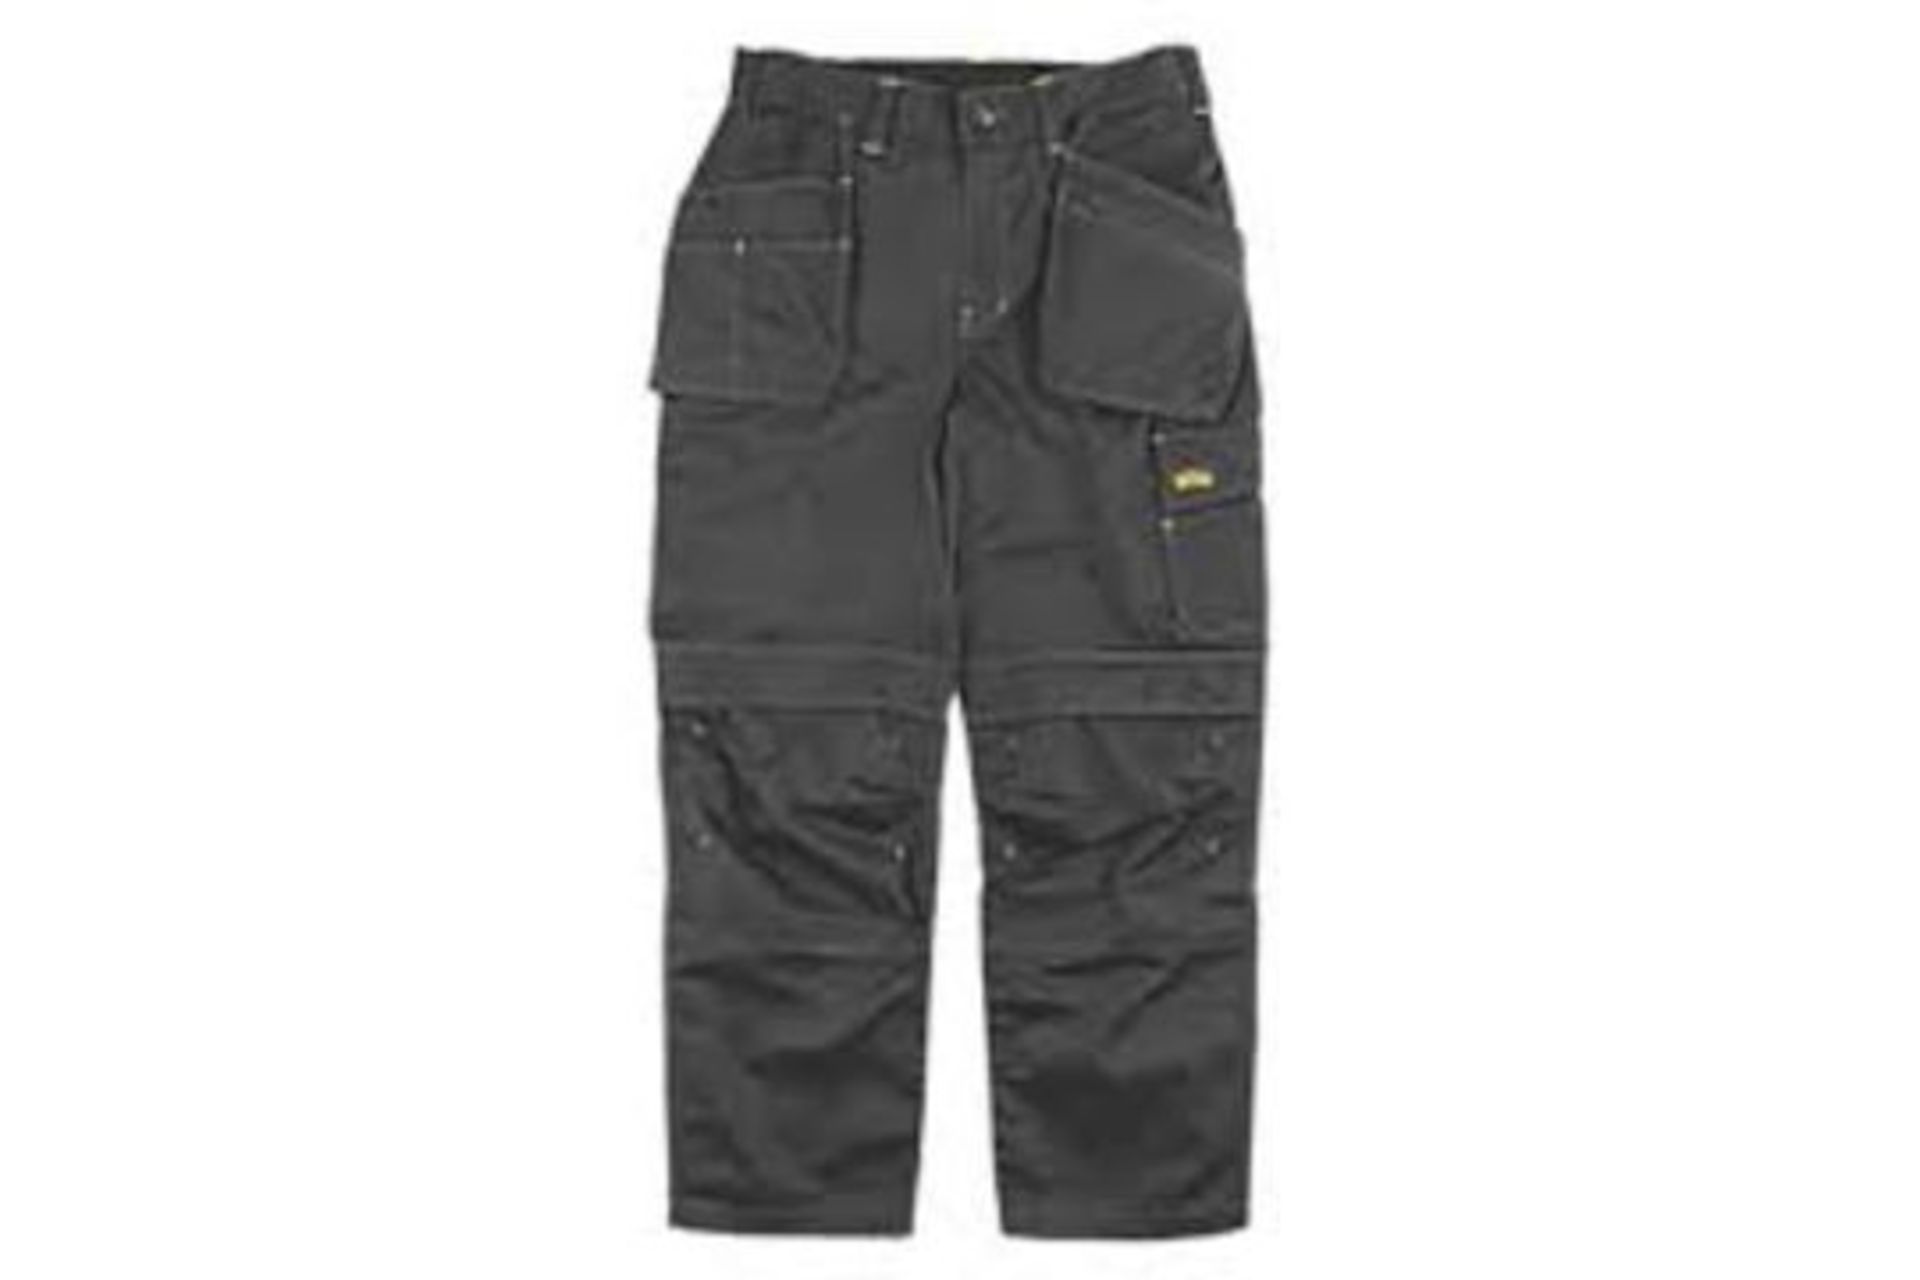 5 X NEW PACKAGED PAIRS OF SITE FOX TROUSERS BLACK. (ROW4MID) Polycotton trousers with top-loading